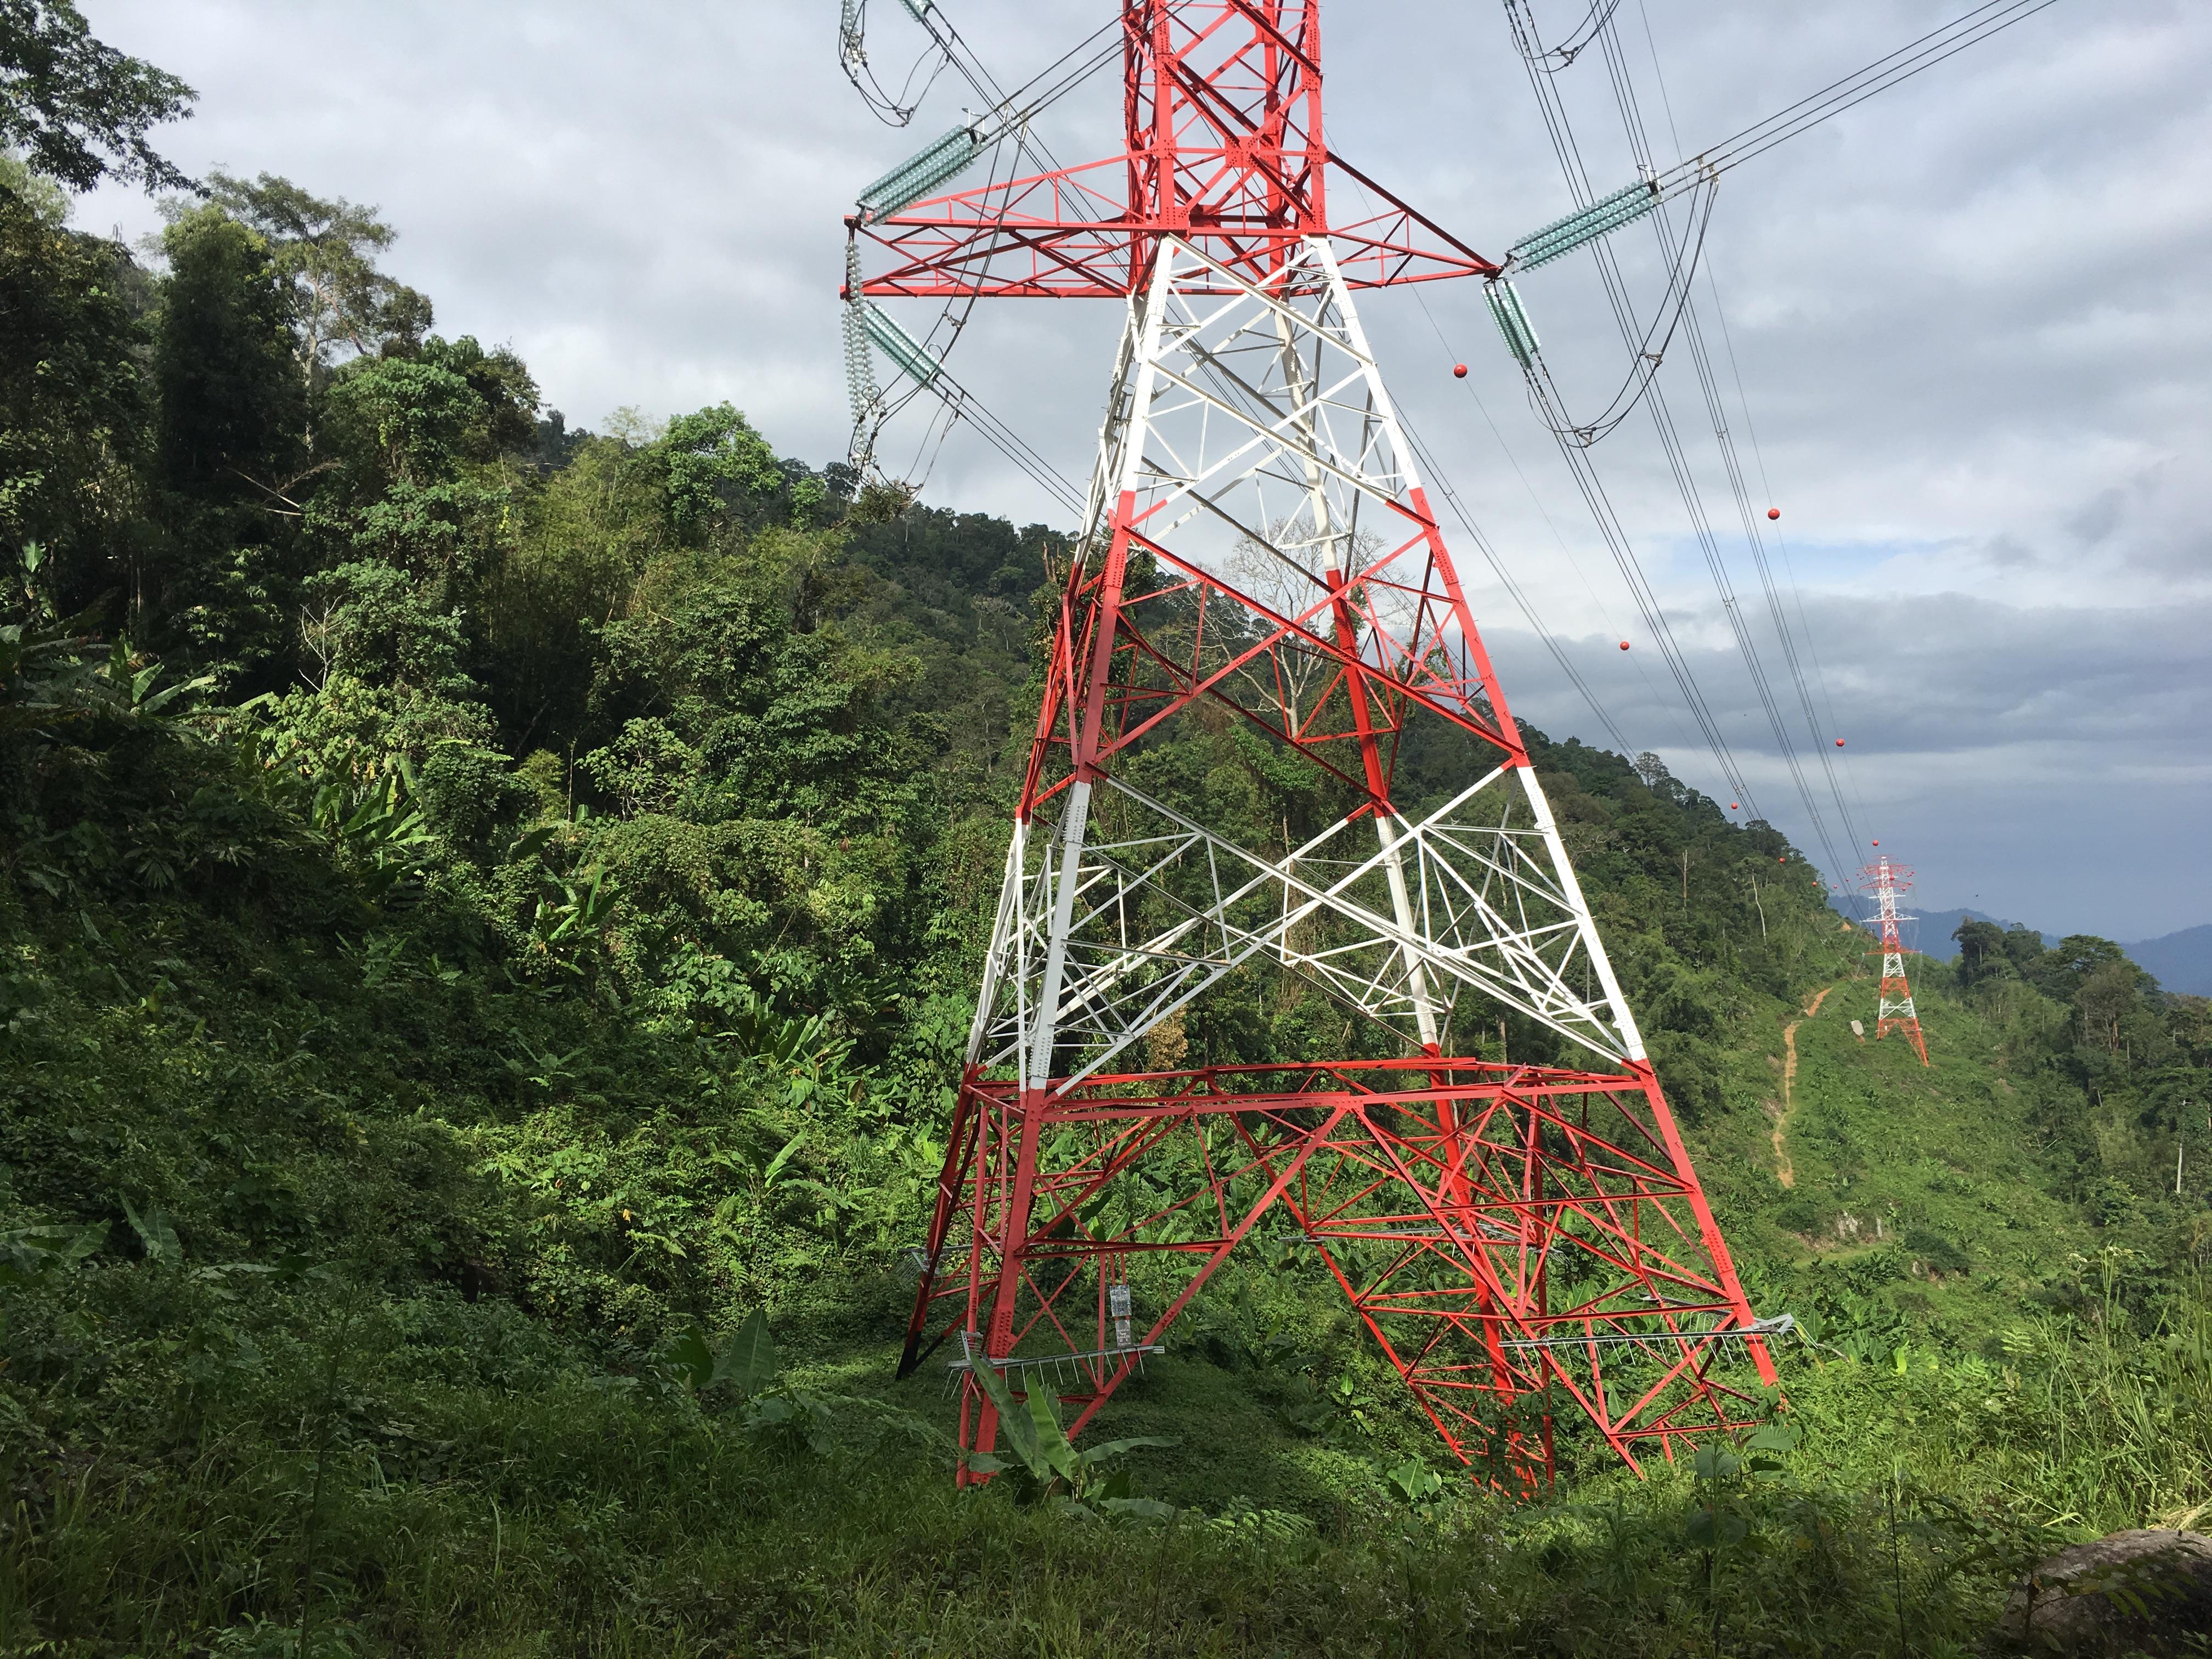 Overhead Power Transmission Tower